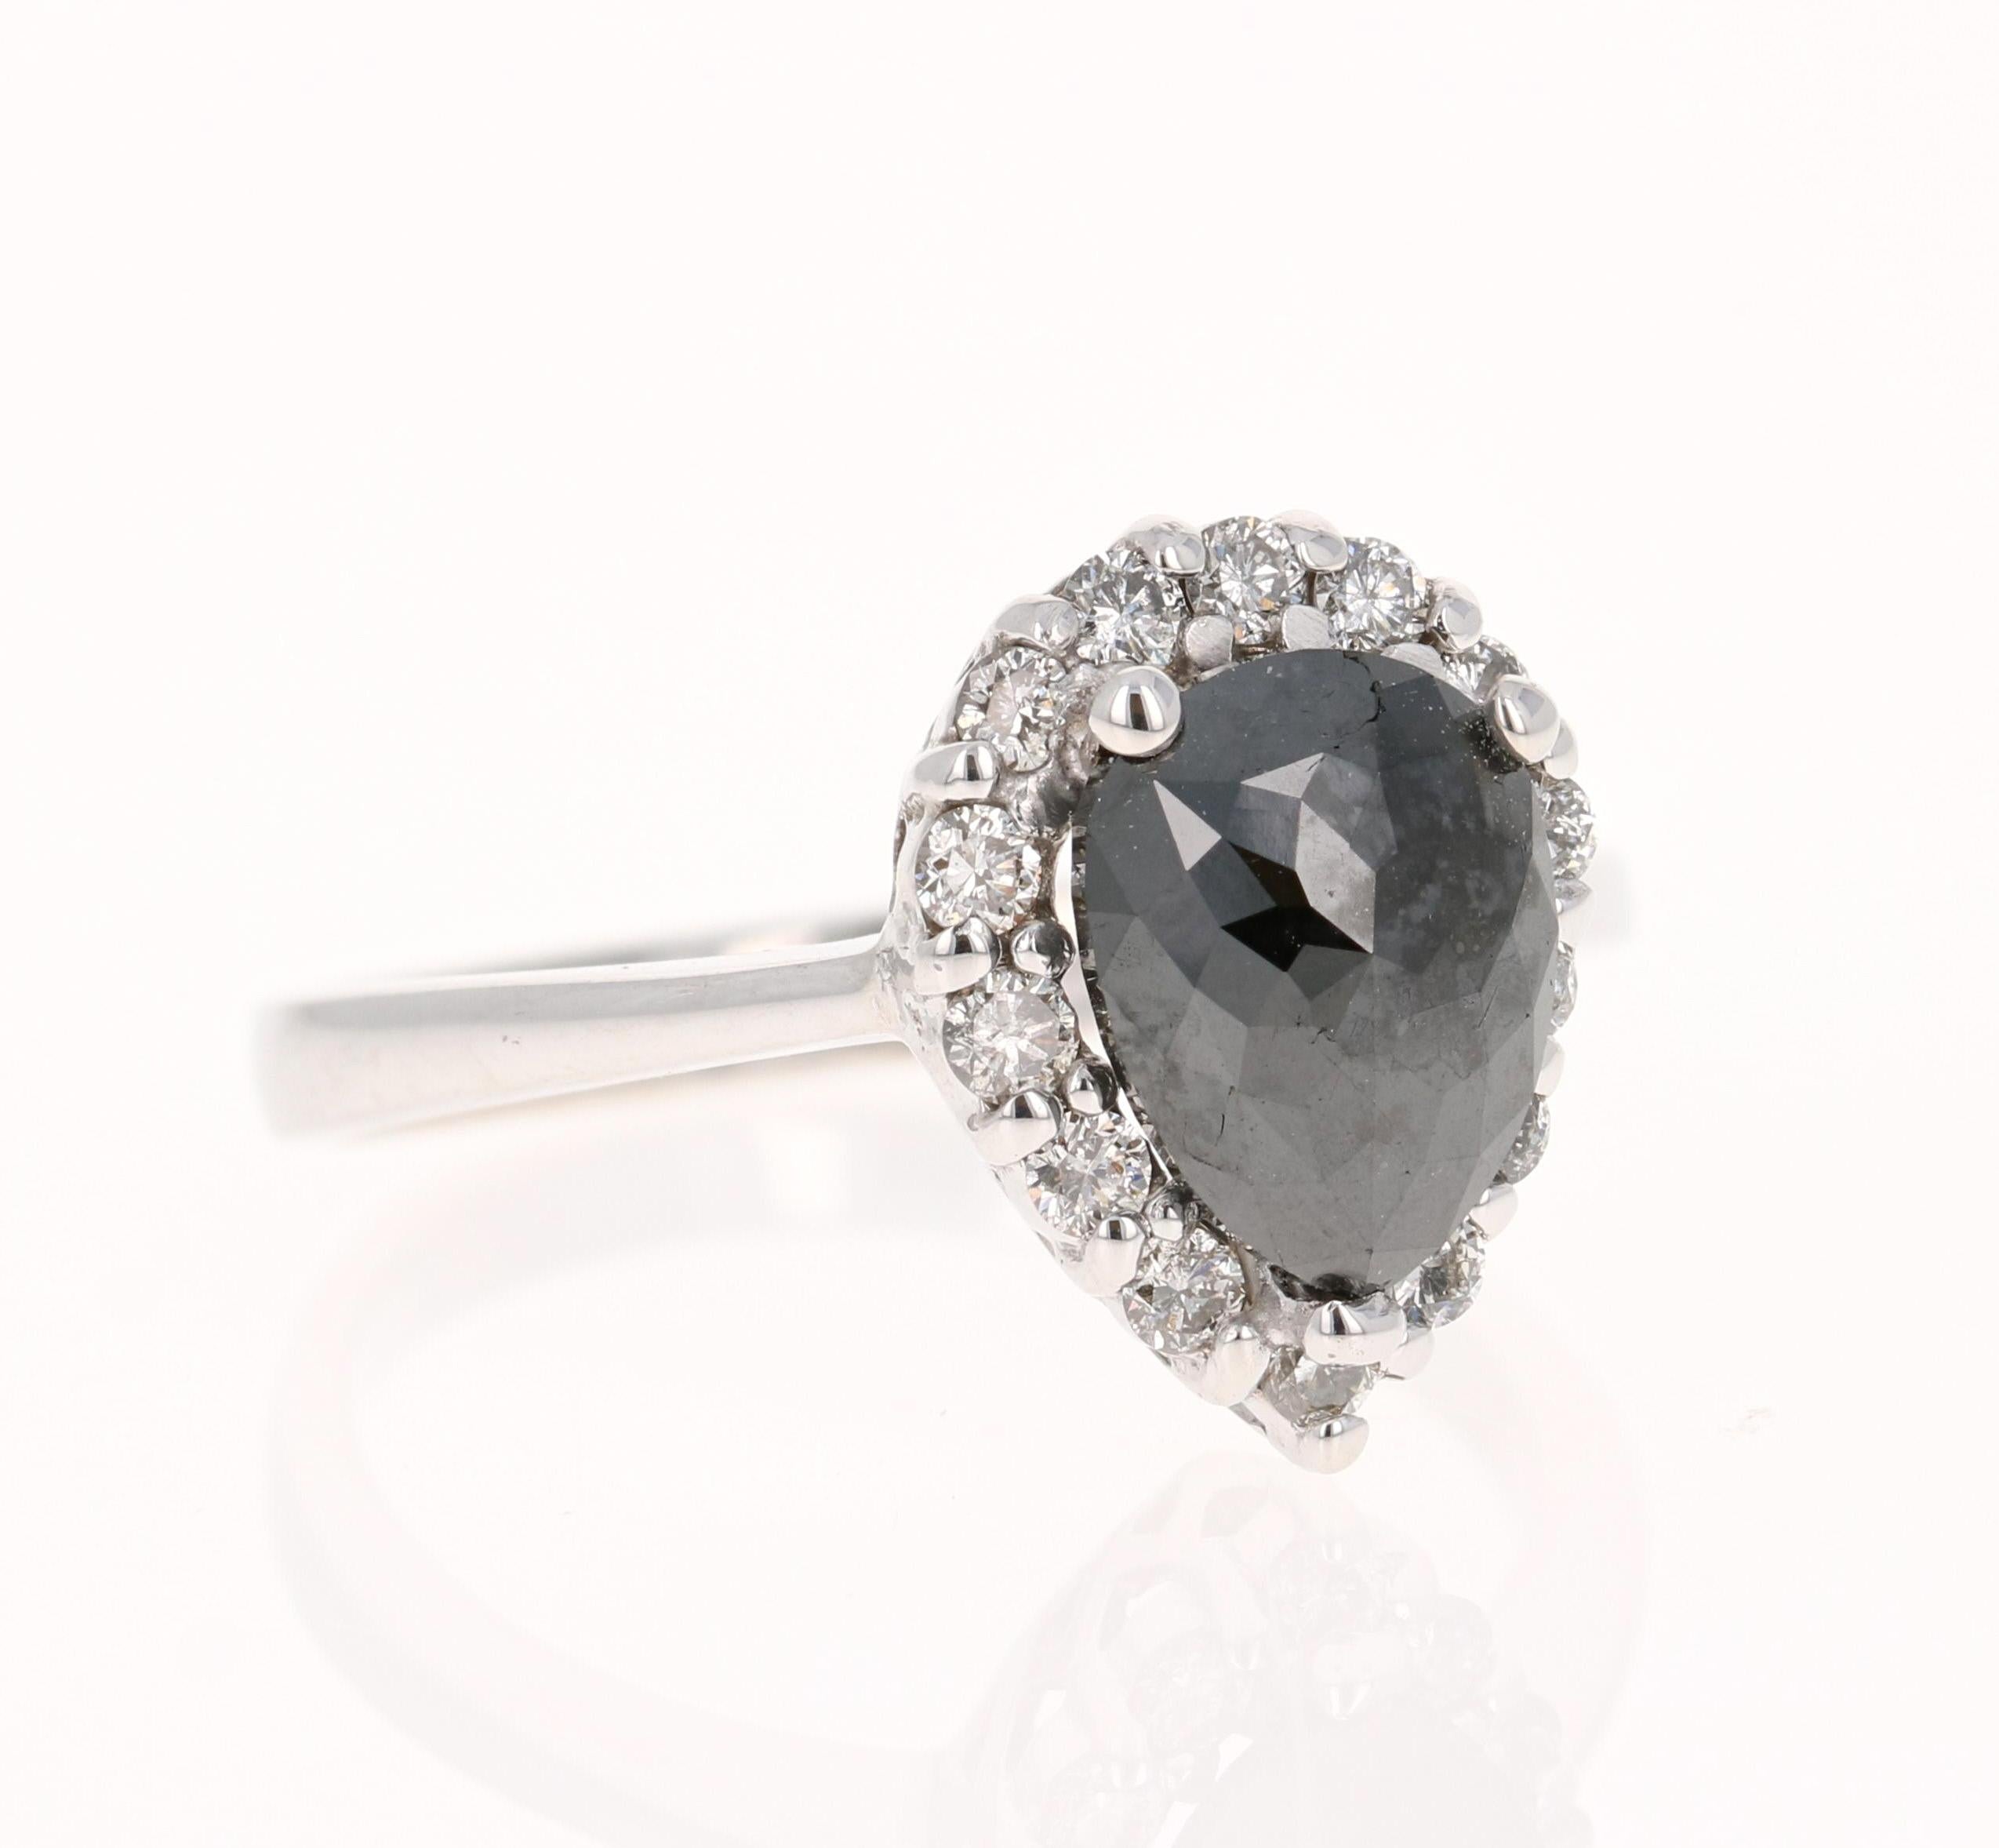 This Black and White Diamond Ring is a unique Engagement Ring or an every day ring! 

Beautiful Pear Cut Black Diamond that weighs 1.75 Carats and is surrounded by 14 Round Cut Diamonds that weigh 0.34 Carats. The clarity and color of the diamonds